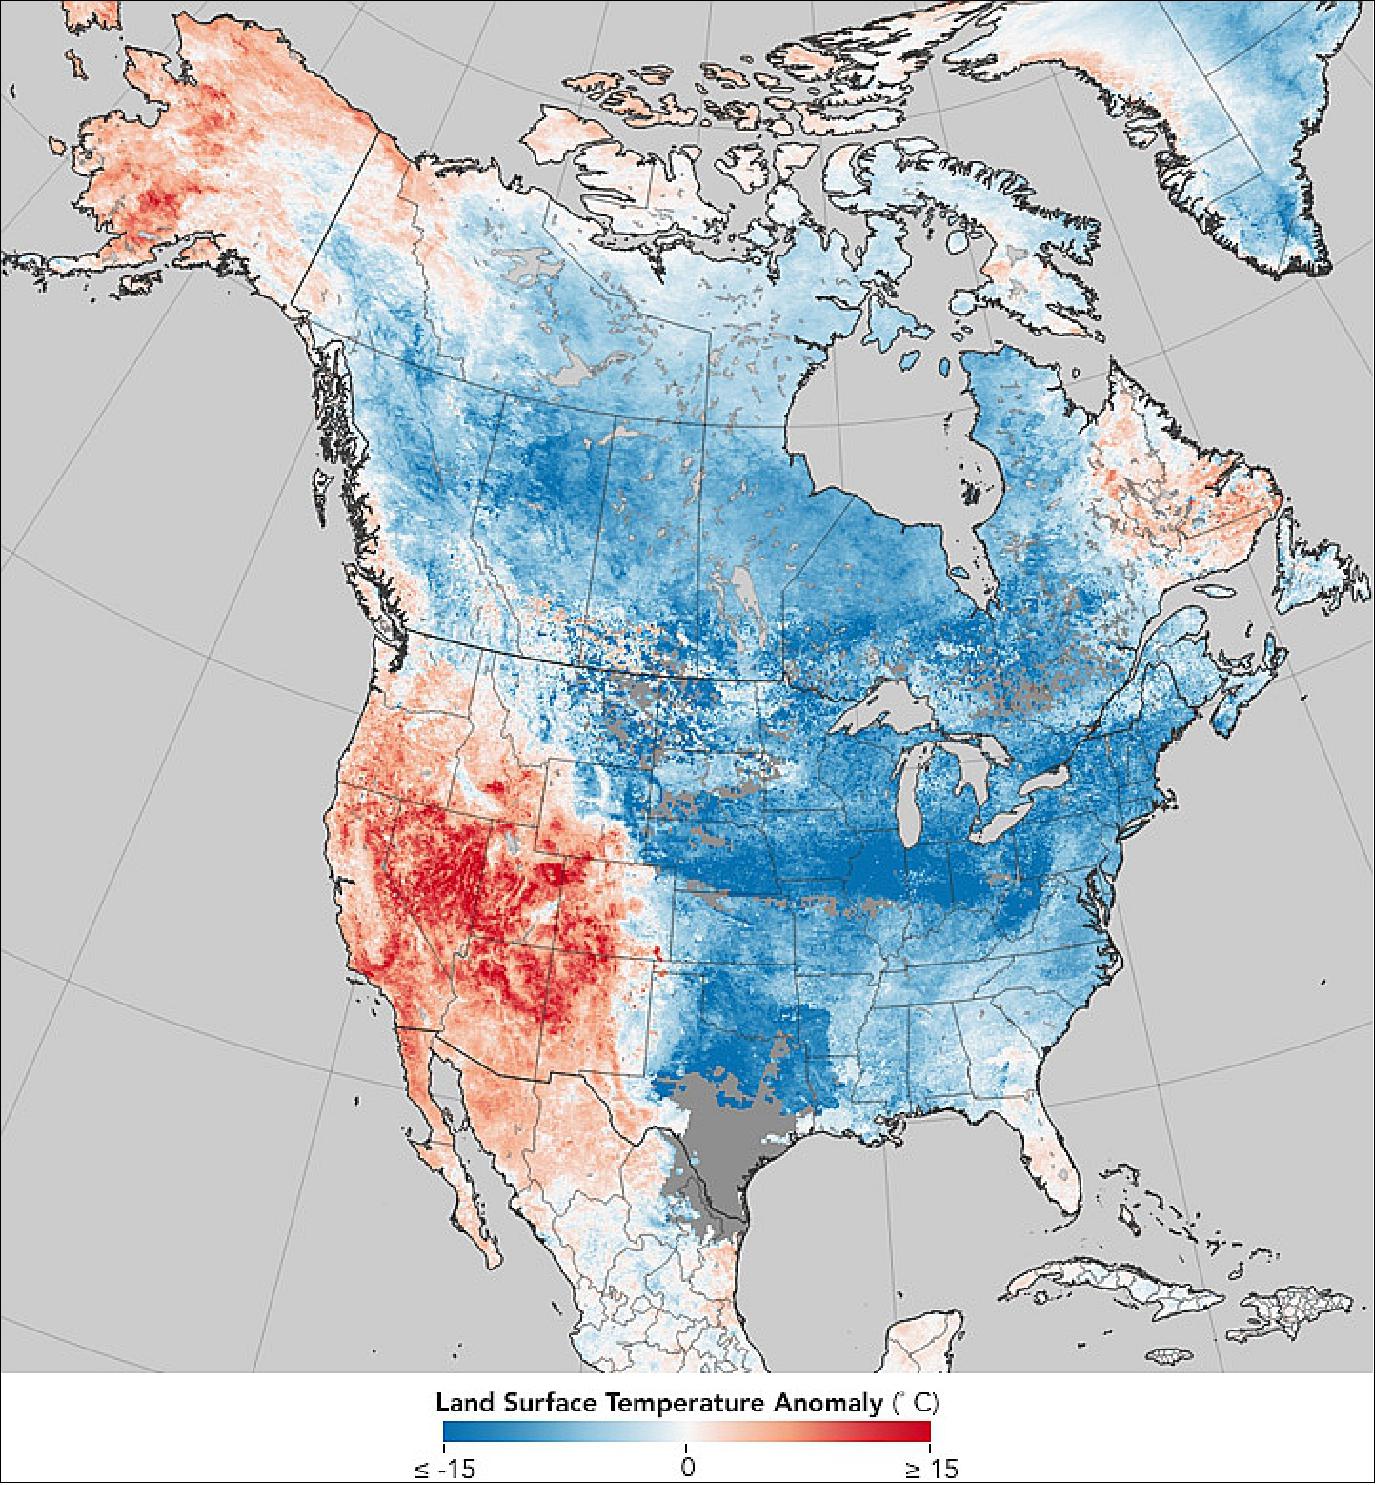 Figure 46: MODIS land surface temperature map of North America, acquired in the period 26 Dec. 2017 to 2 Jan. 2018 (image credit: NASA Earth Observatory maps by Jesse Allen, based on MODIS land surface temperature data provided by the Land Processes Distributed Active Archive Center. Story by Adam Voiland)